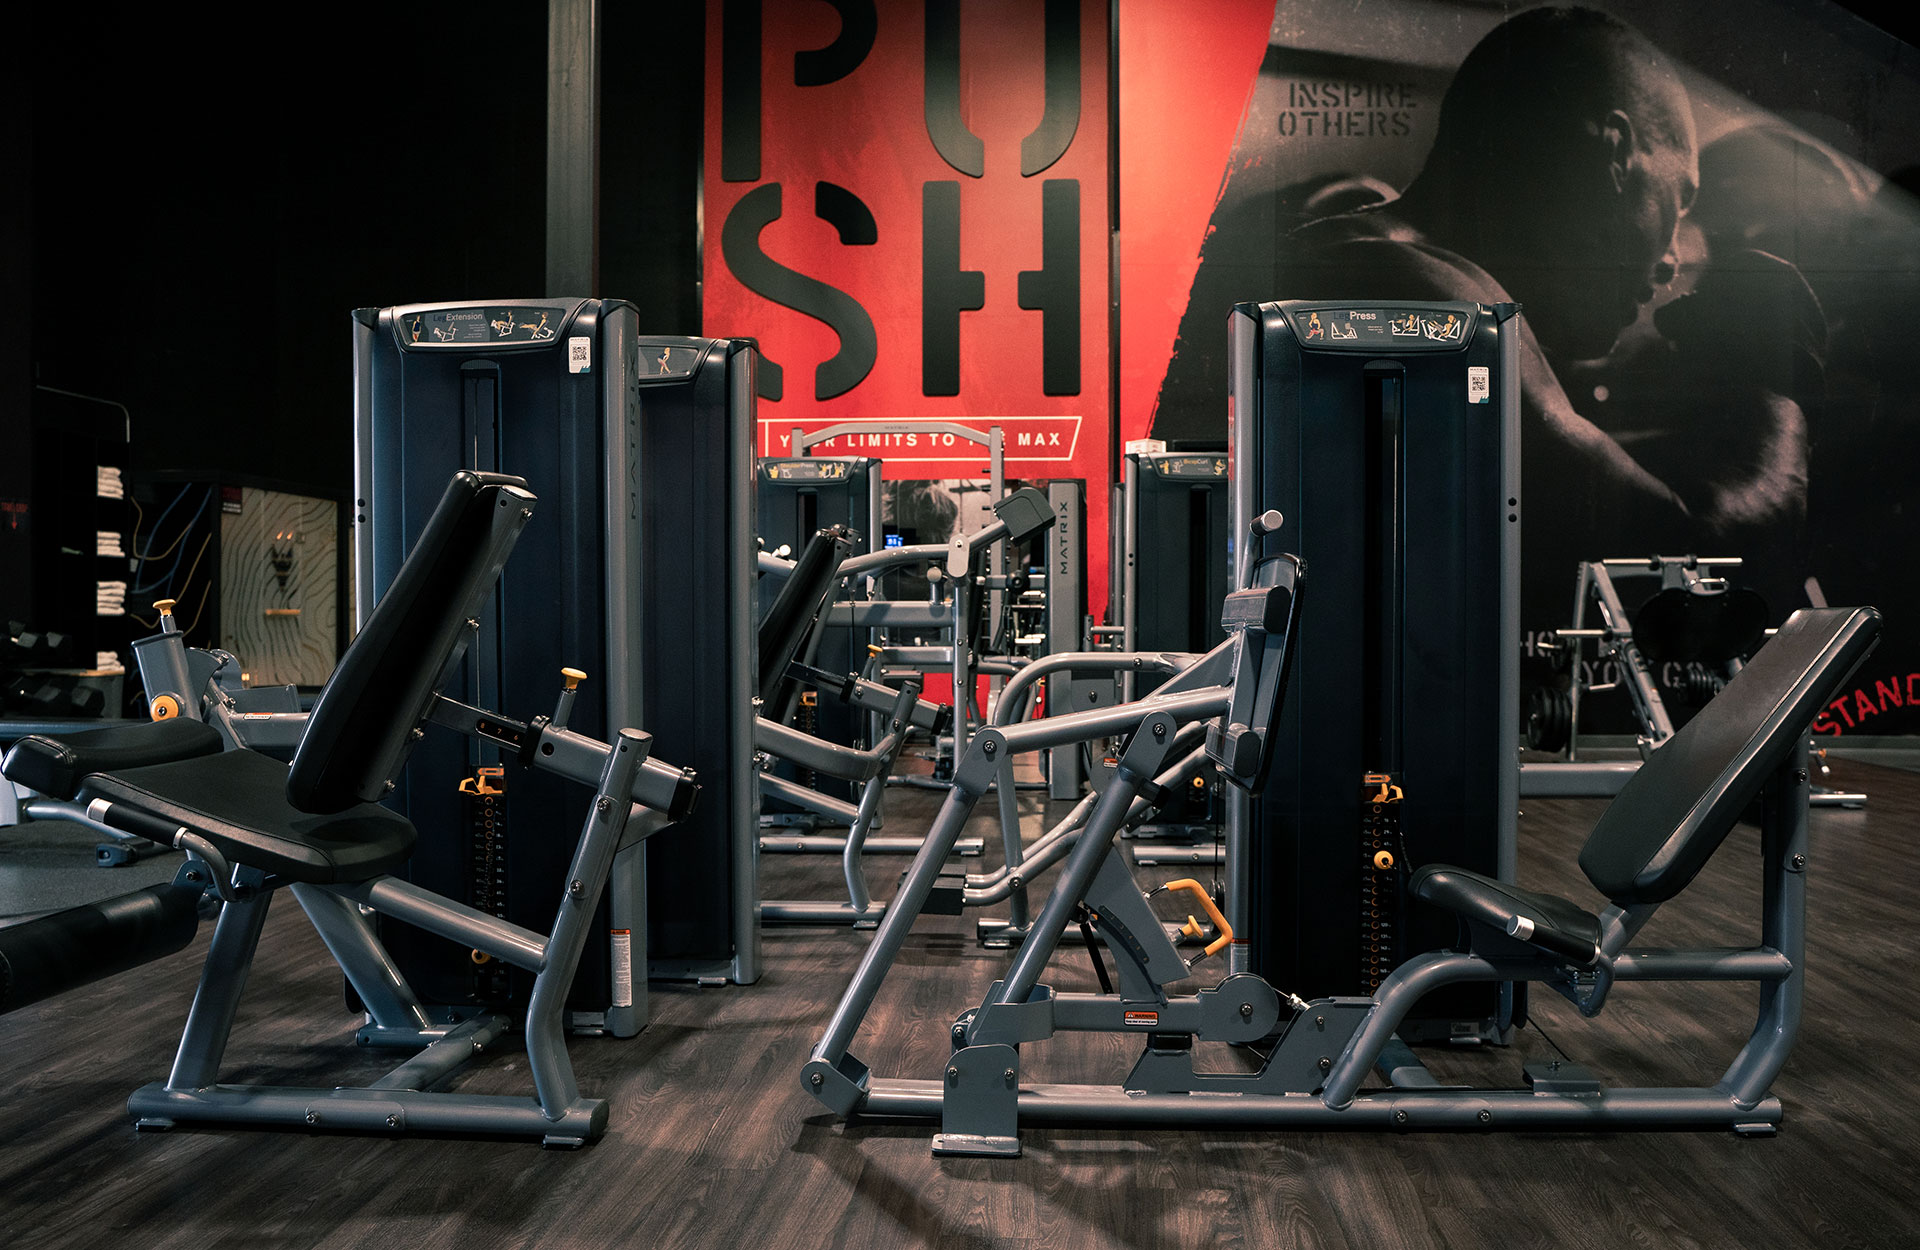 Workout equipment at the Omaha-based 24/7 fitness center